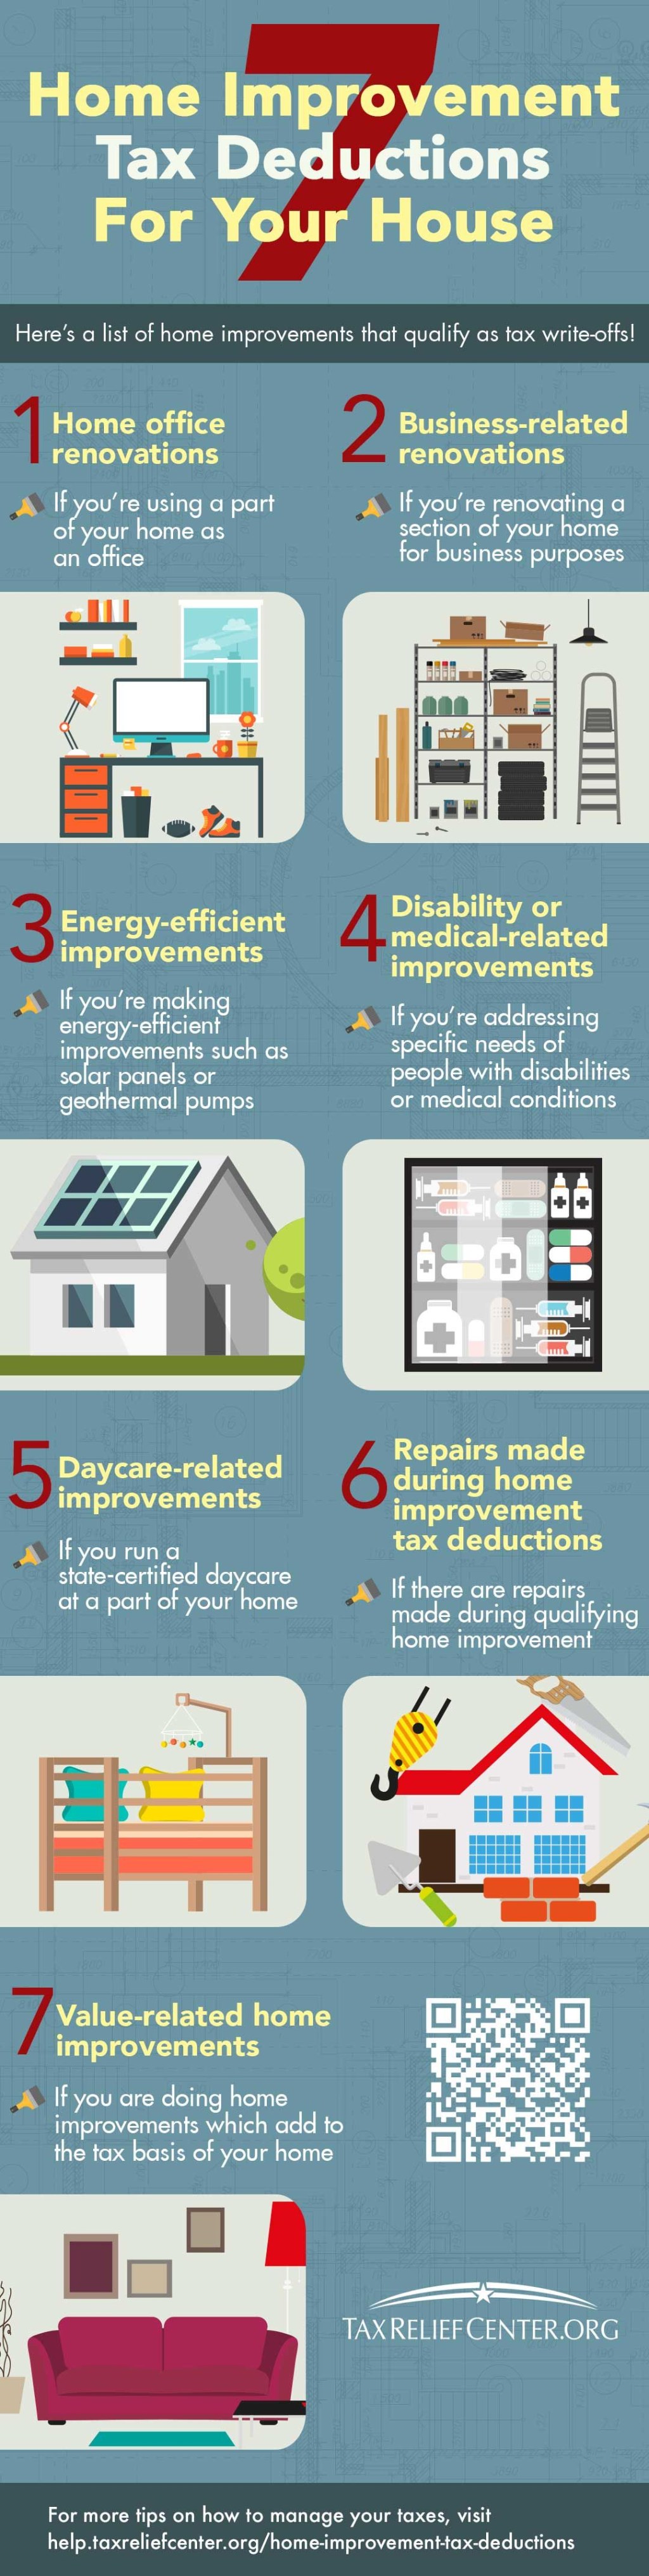 home improvement tax deductions infographic tax deductions